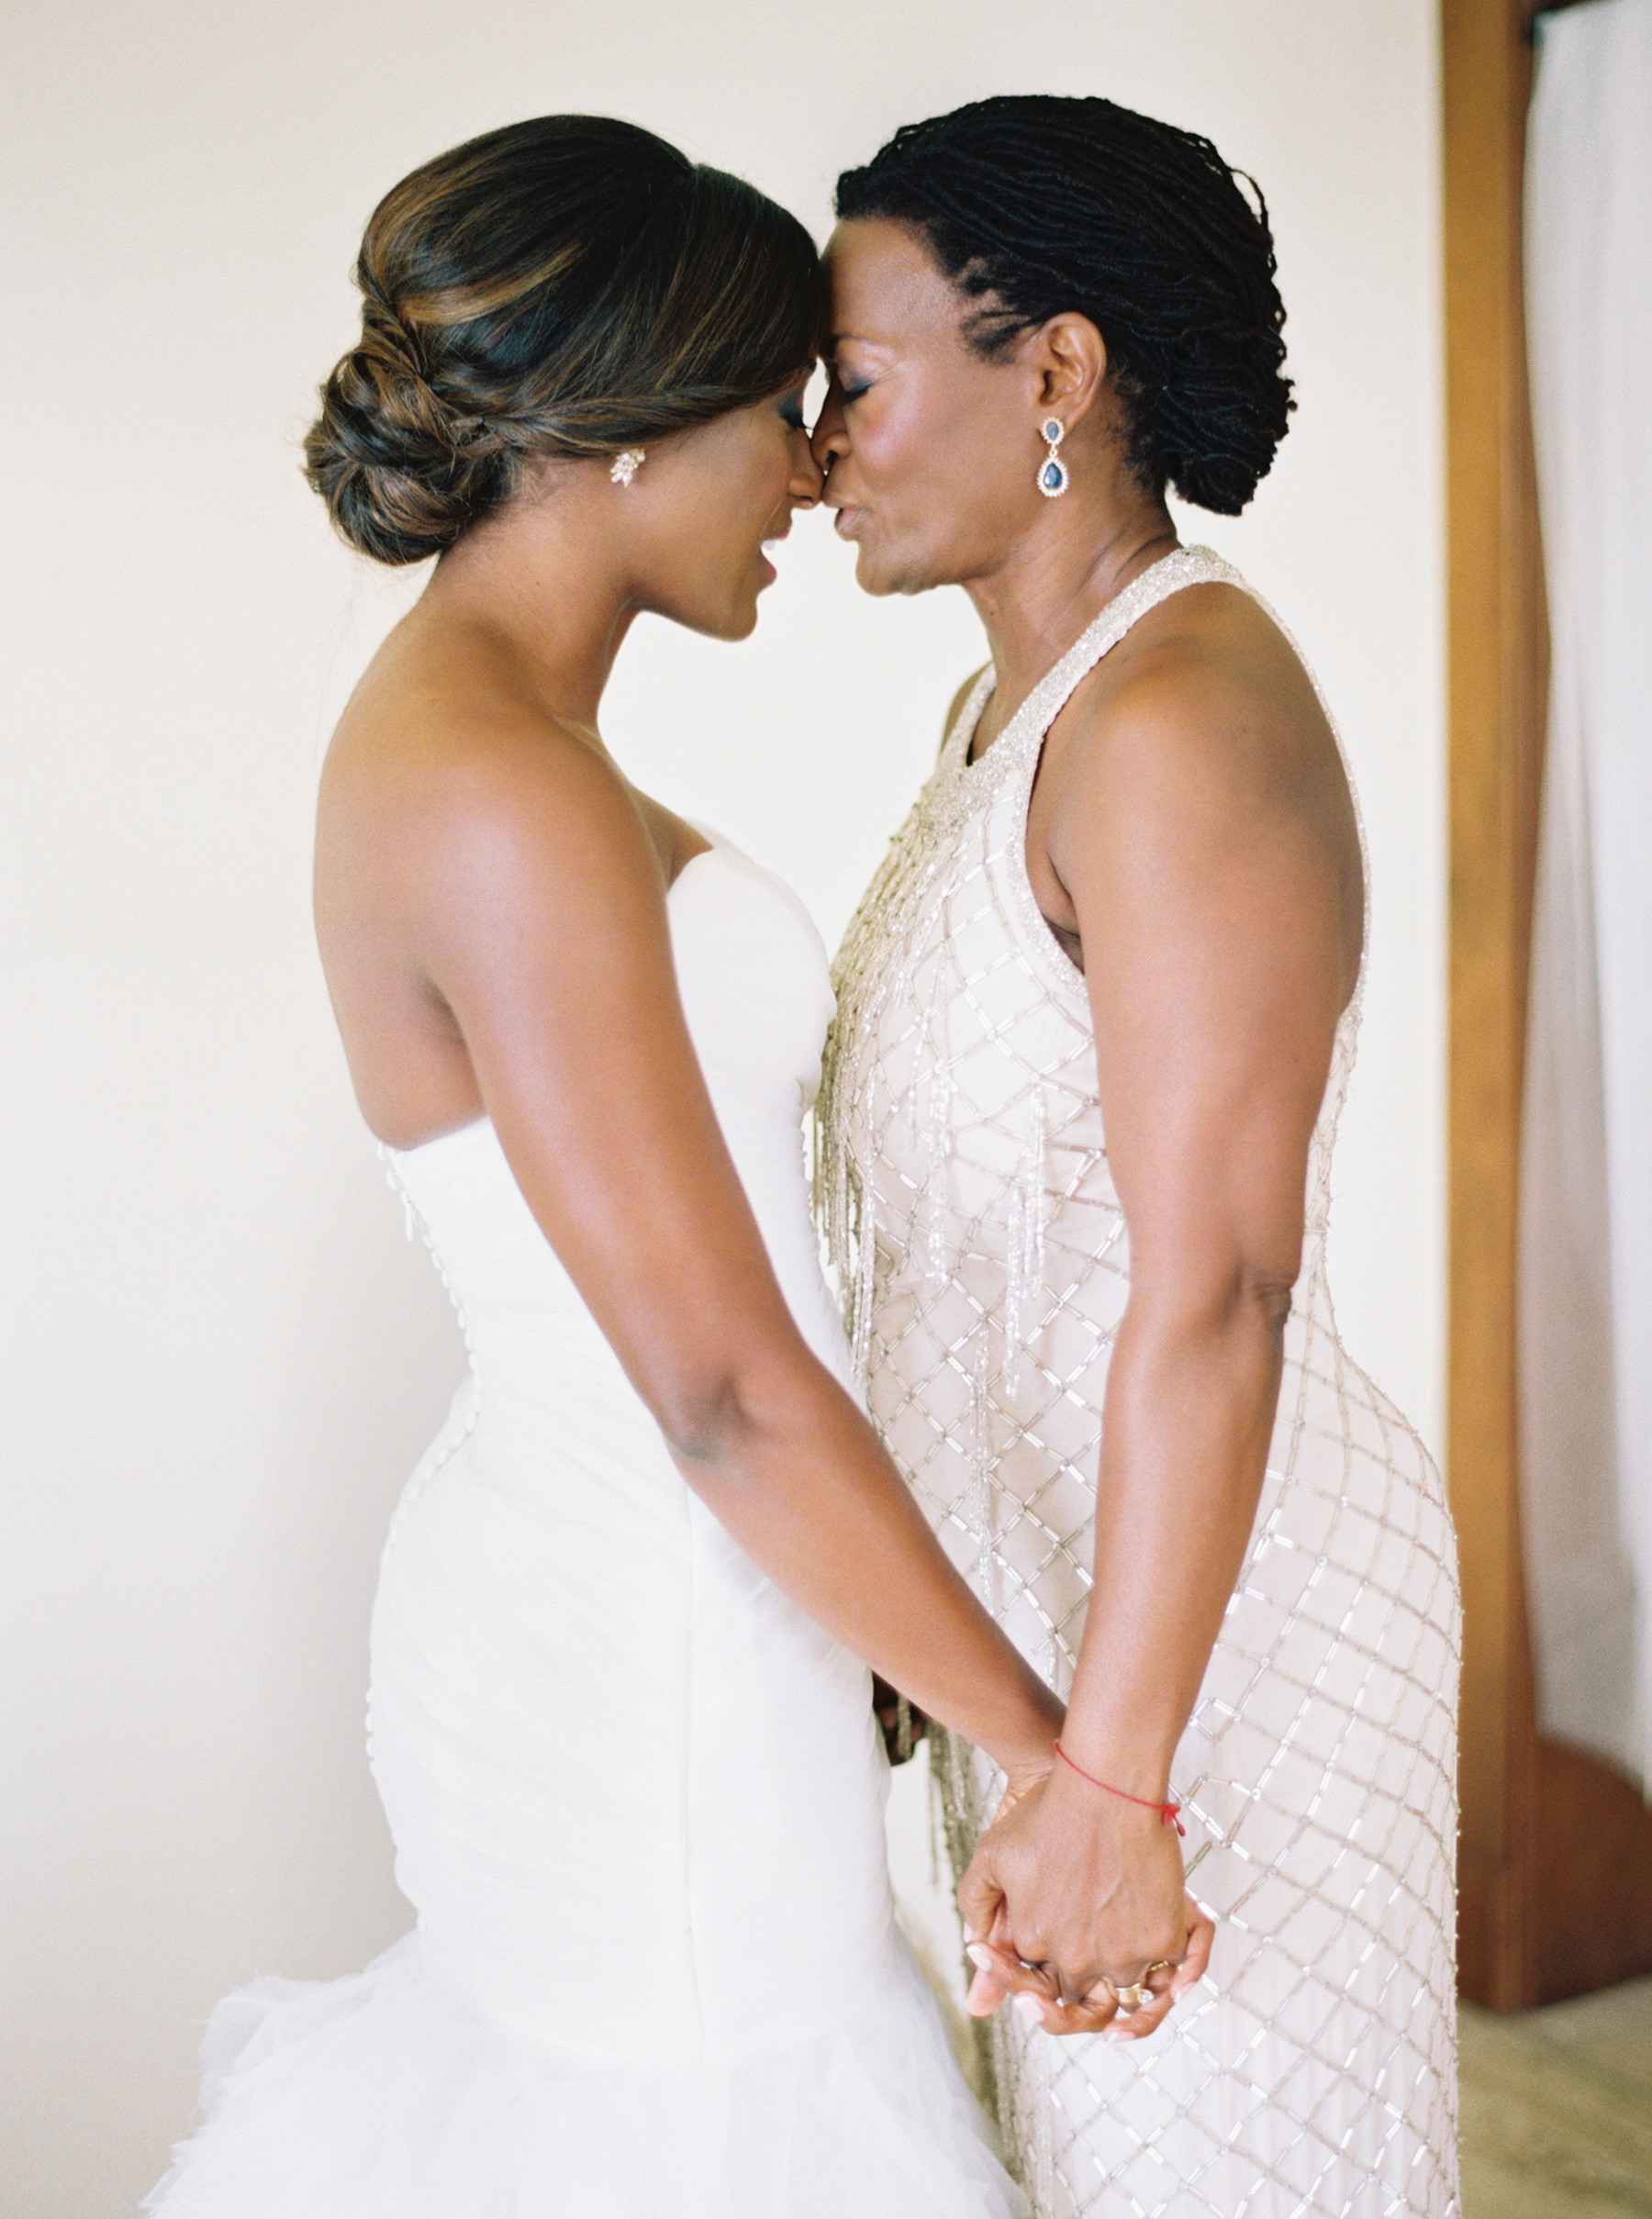 Black Hairstyles For Mother Of The Bride